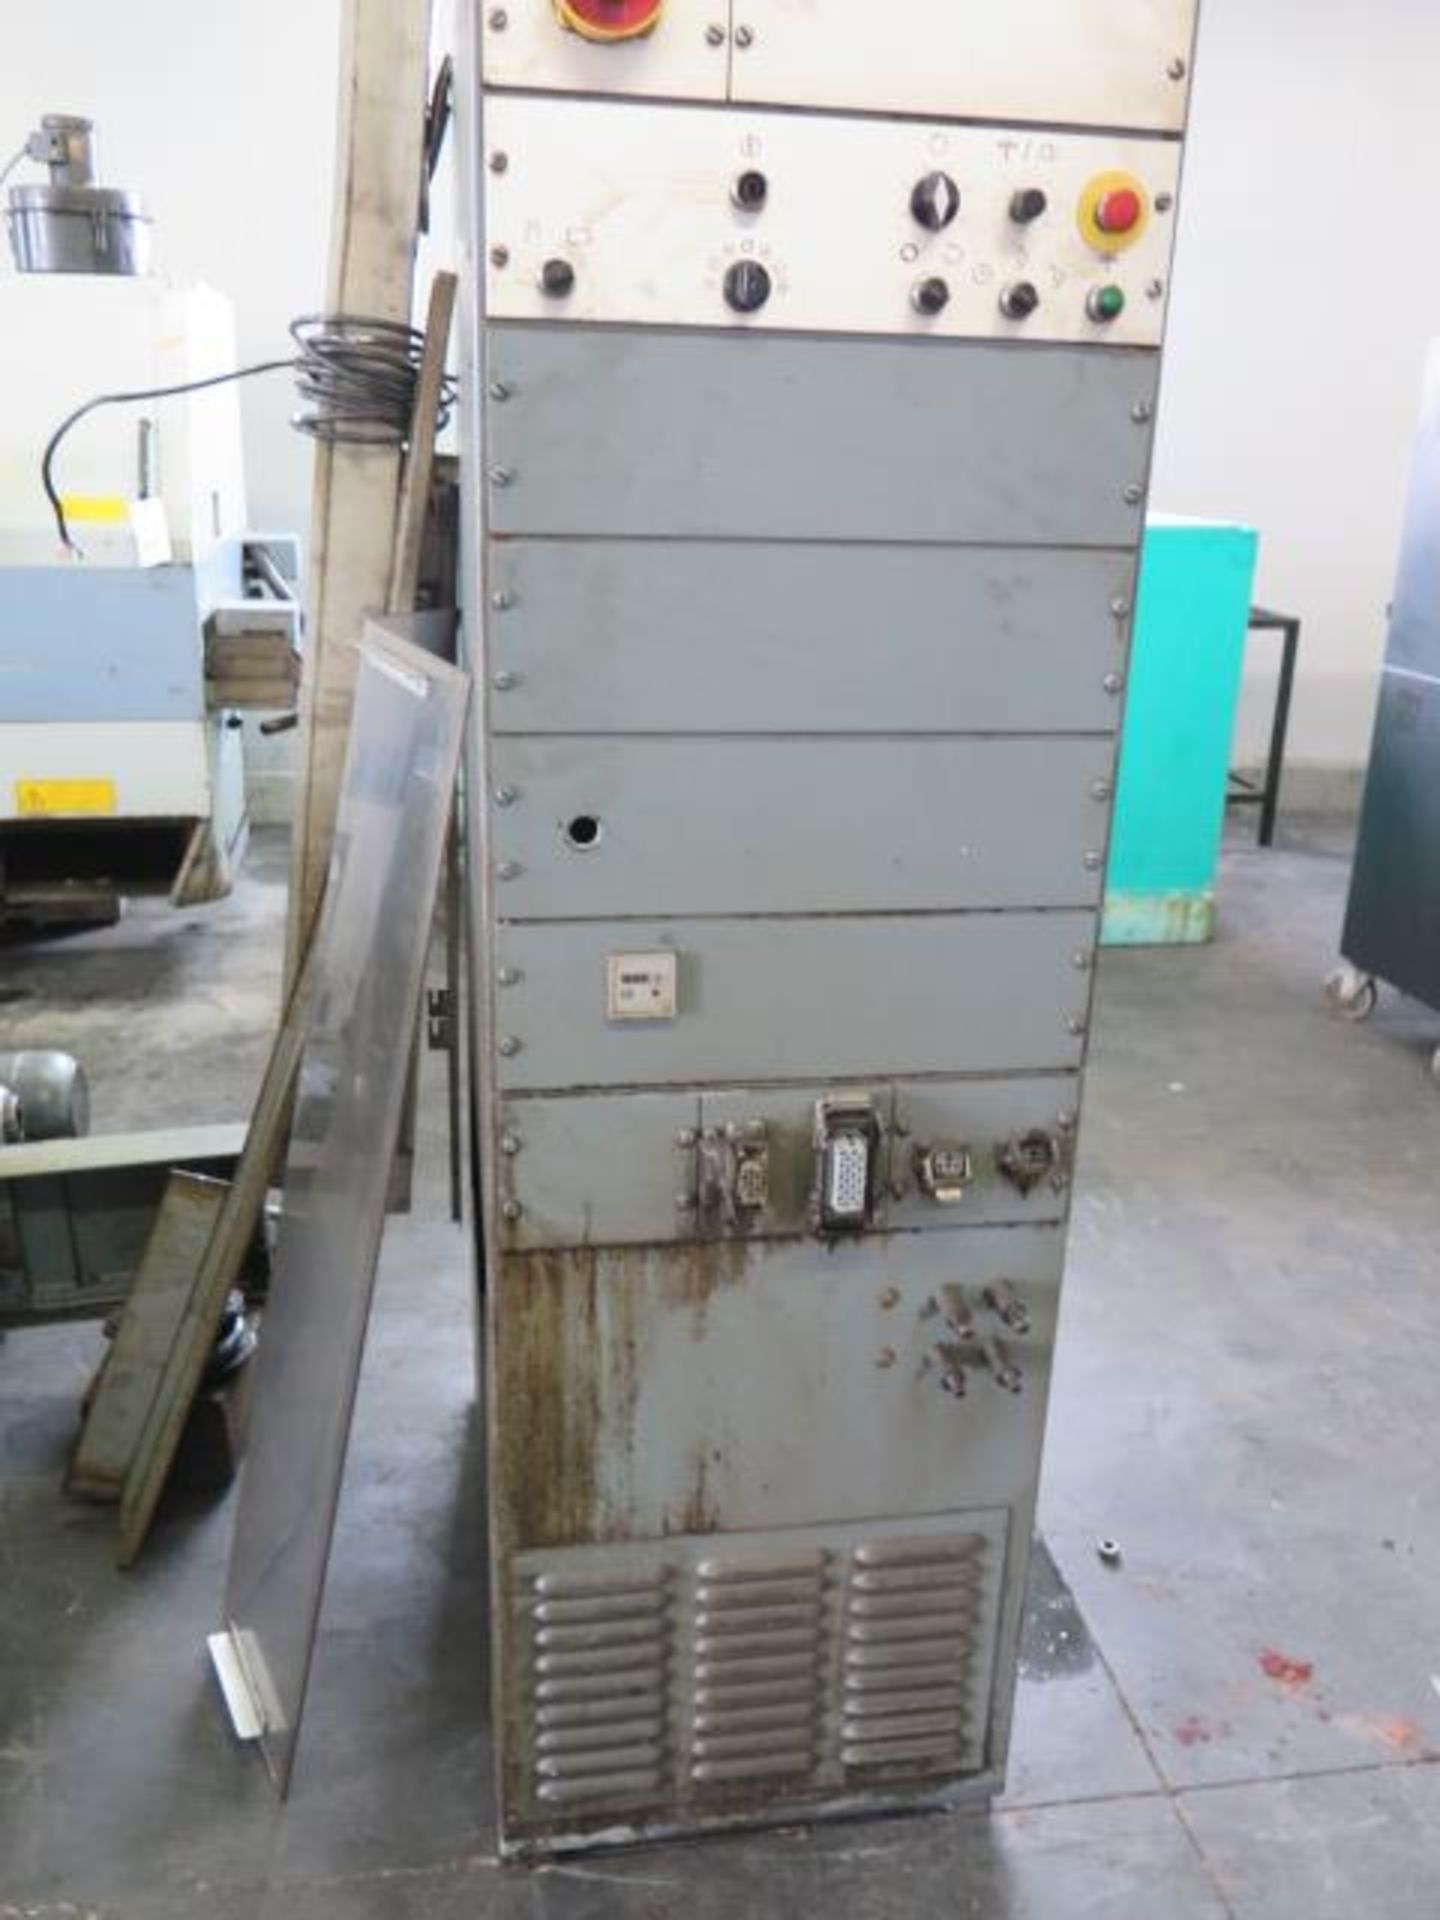 Studer S30 Type RHU 650 Automatic Cylindrical Grinder (NEEDS REPAIR) s/n 422.54 w/ Studer Controls, - Image 10 of 13